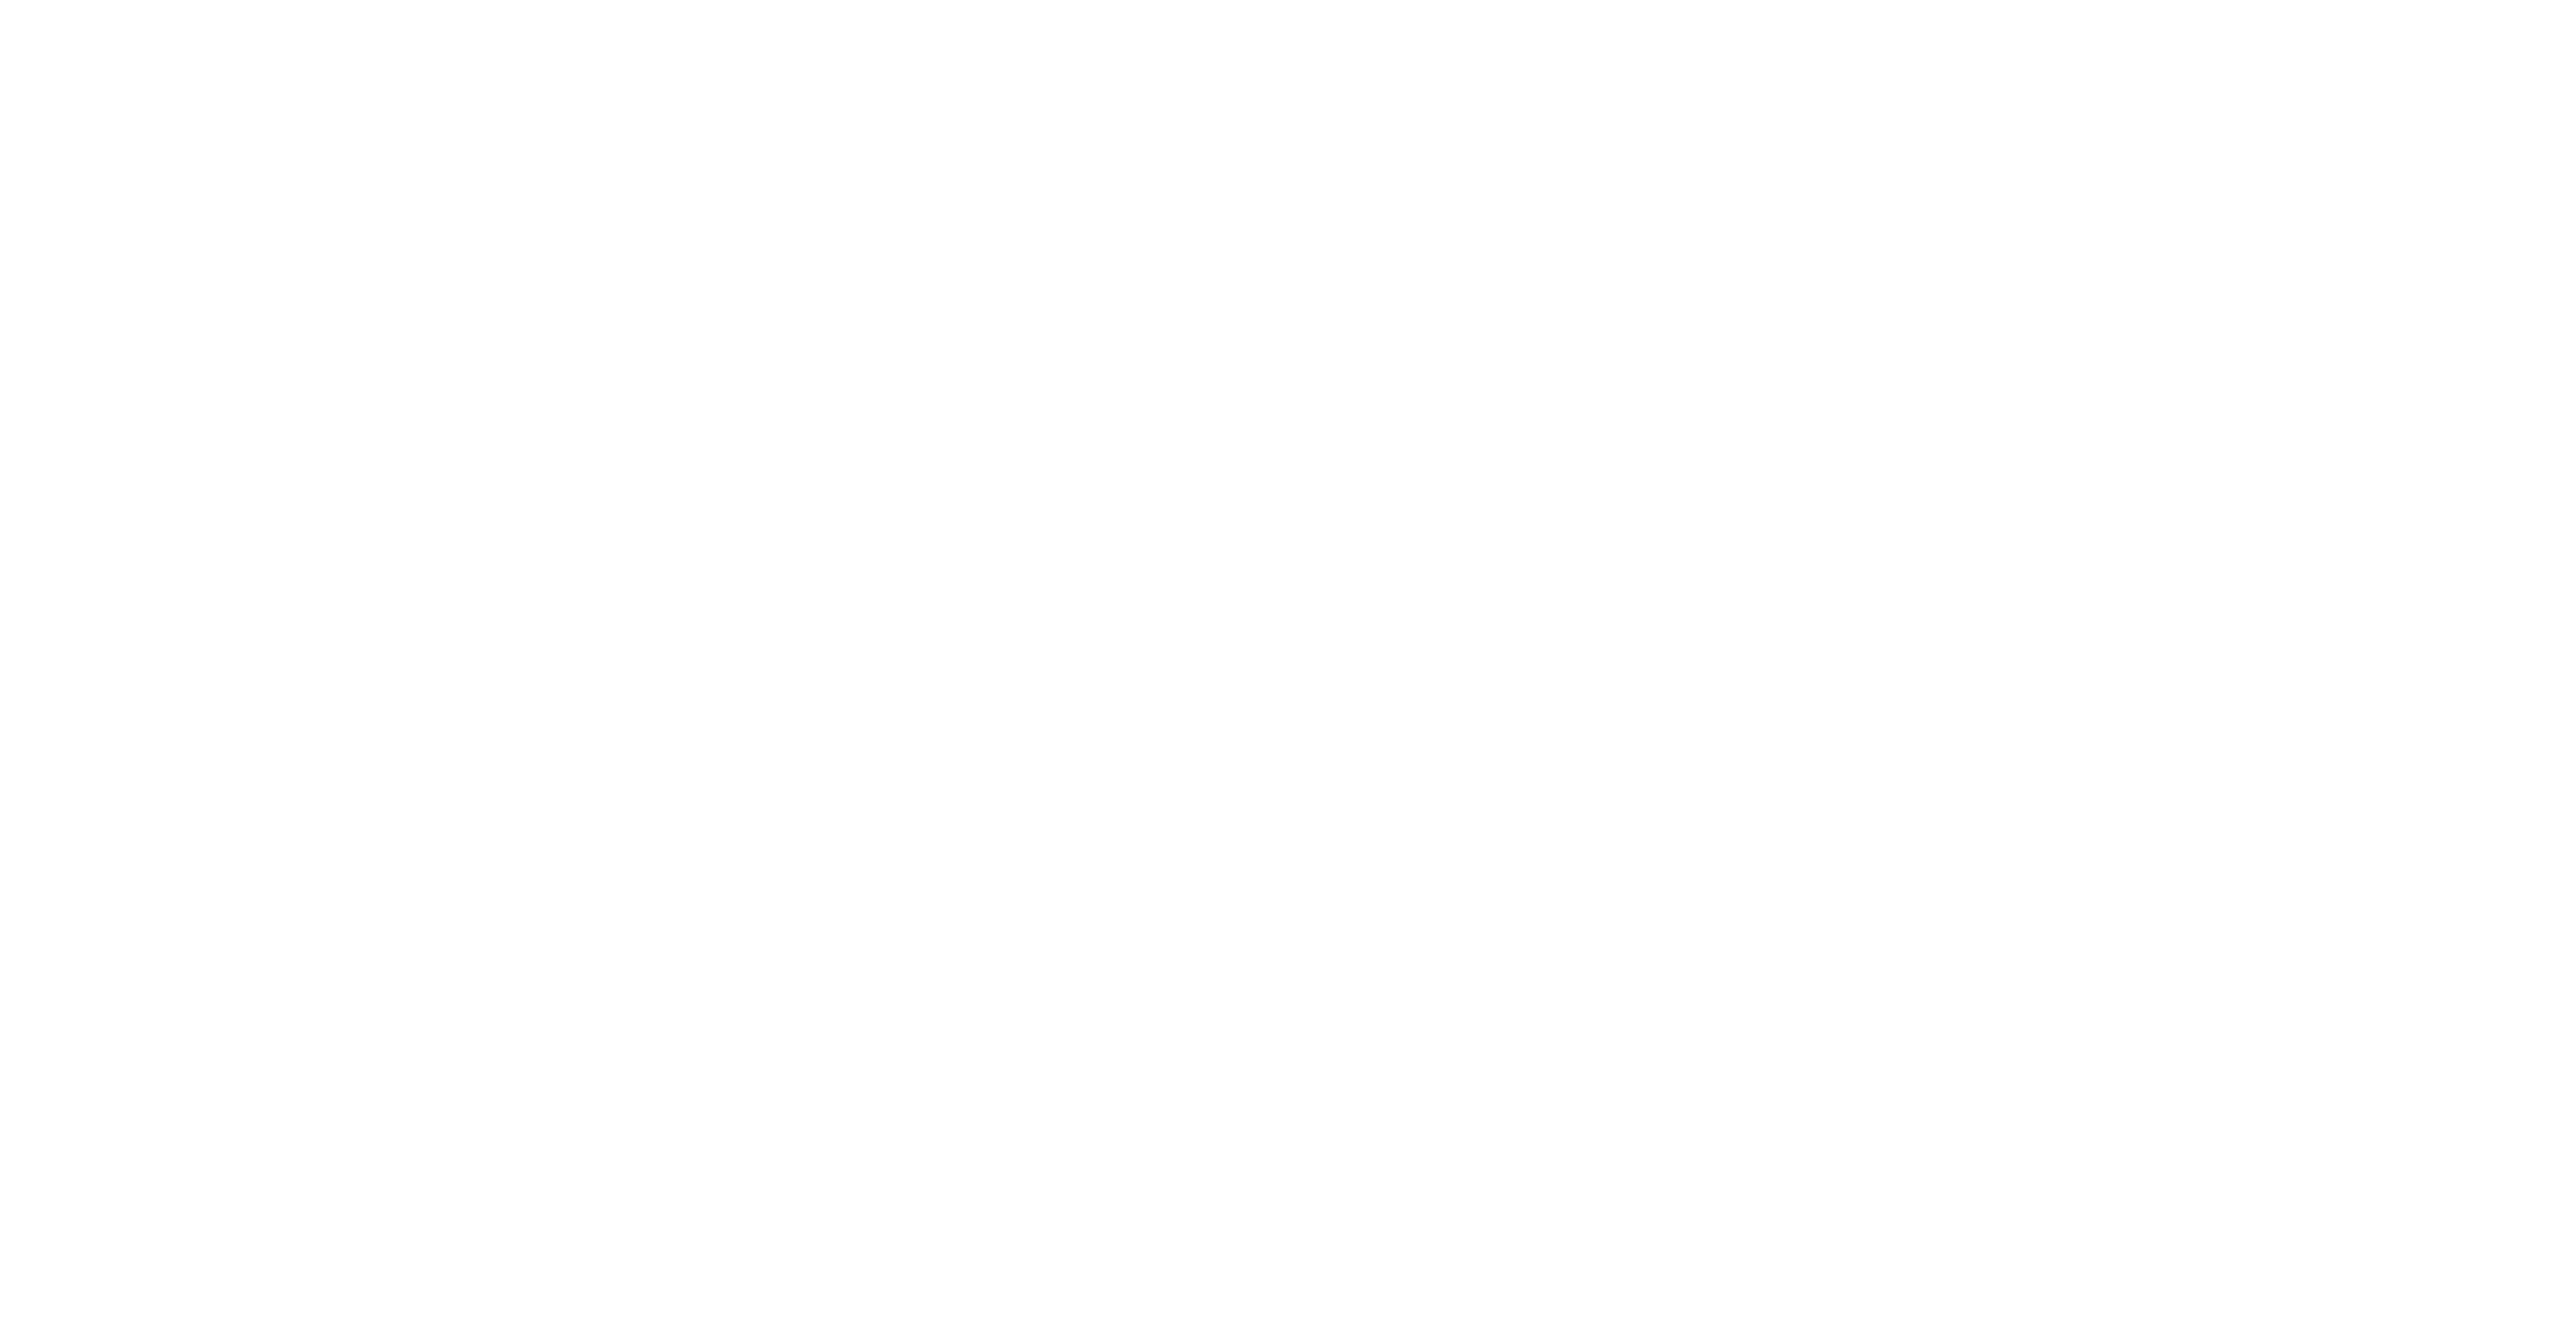 Trexis Insurance Companies